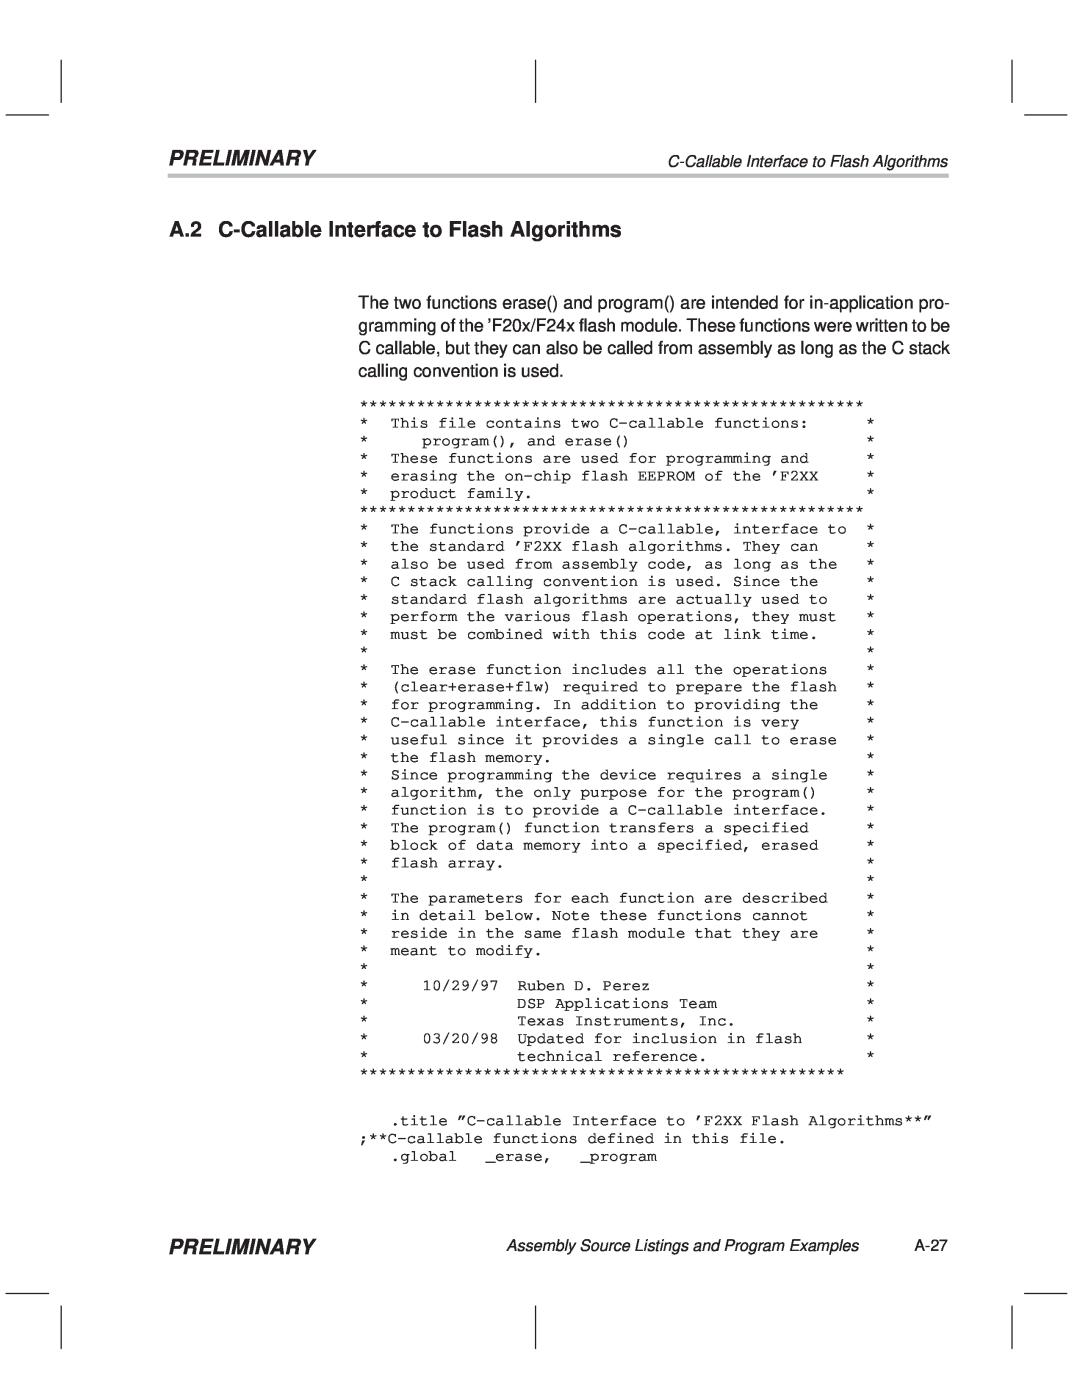 Texas Instruments TMS320F20x/F24x DSP manual A.2 C-Callable Interface to Flash Algorithms, Preliminary, A-27 